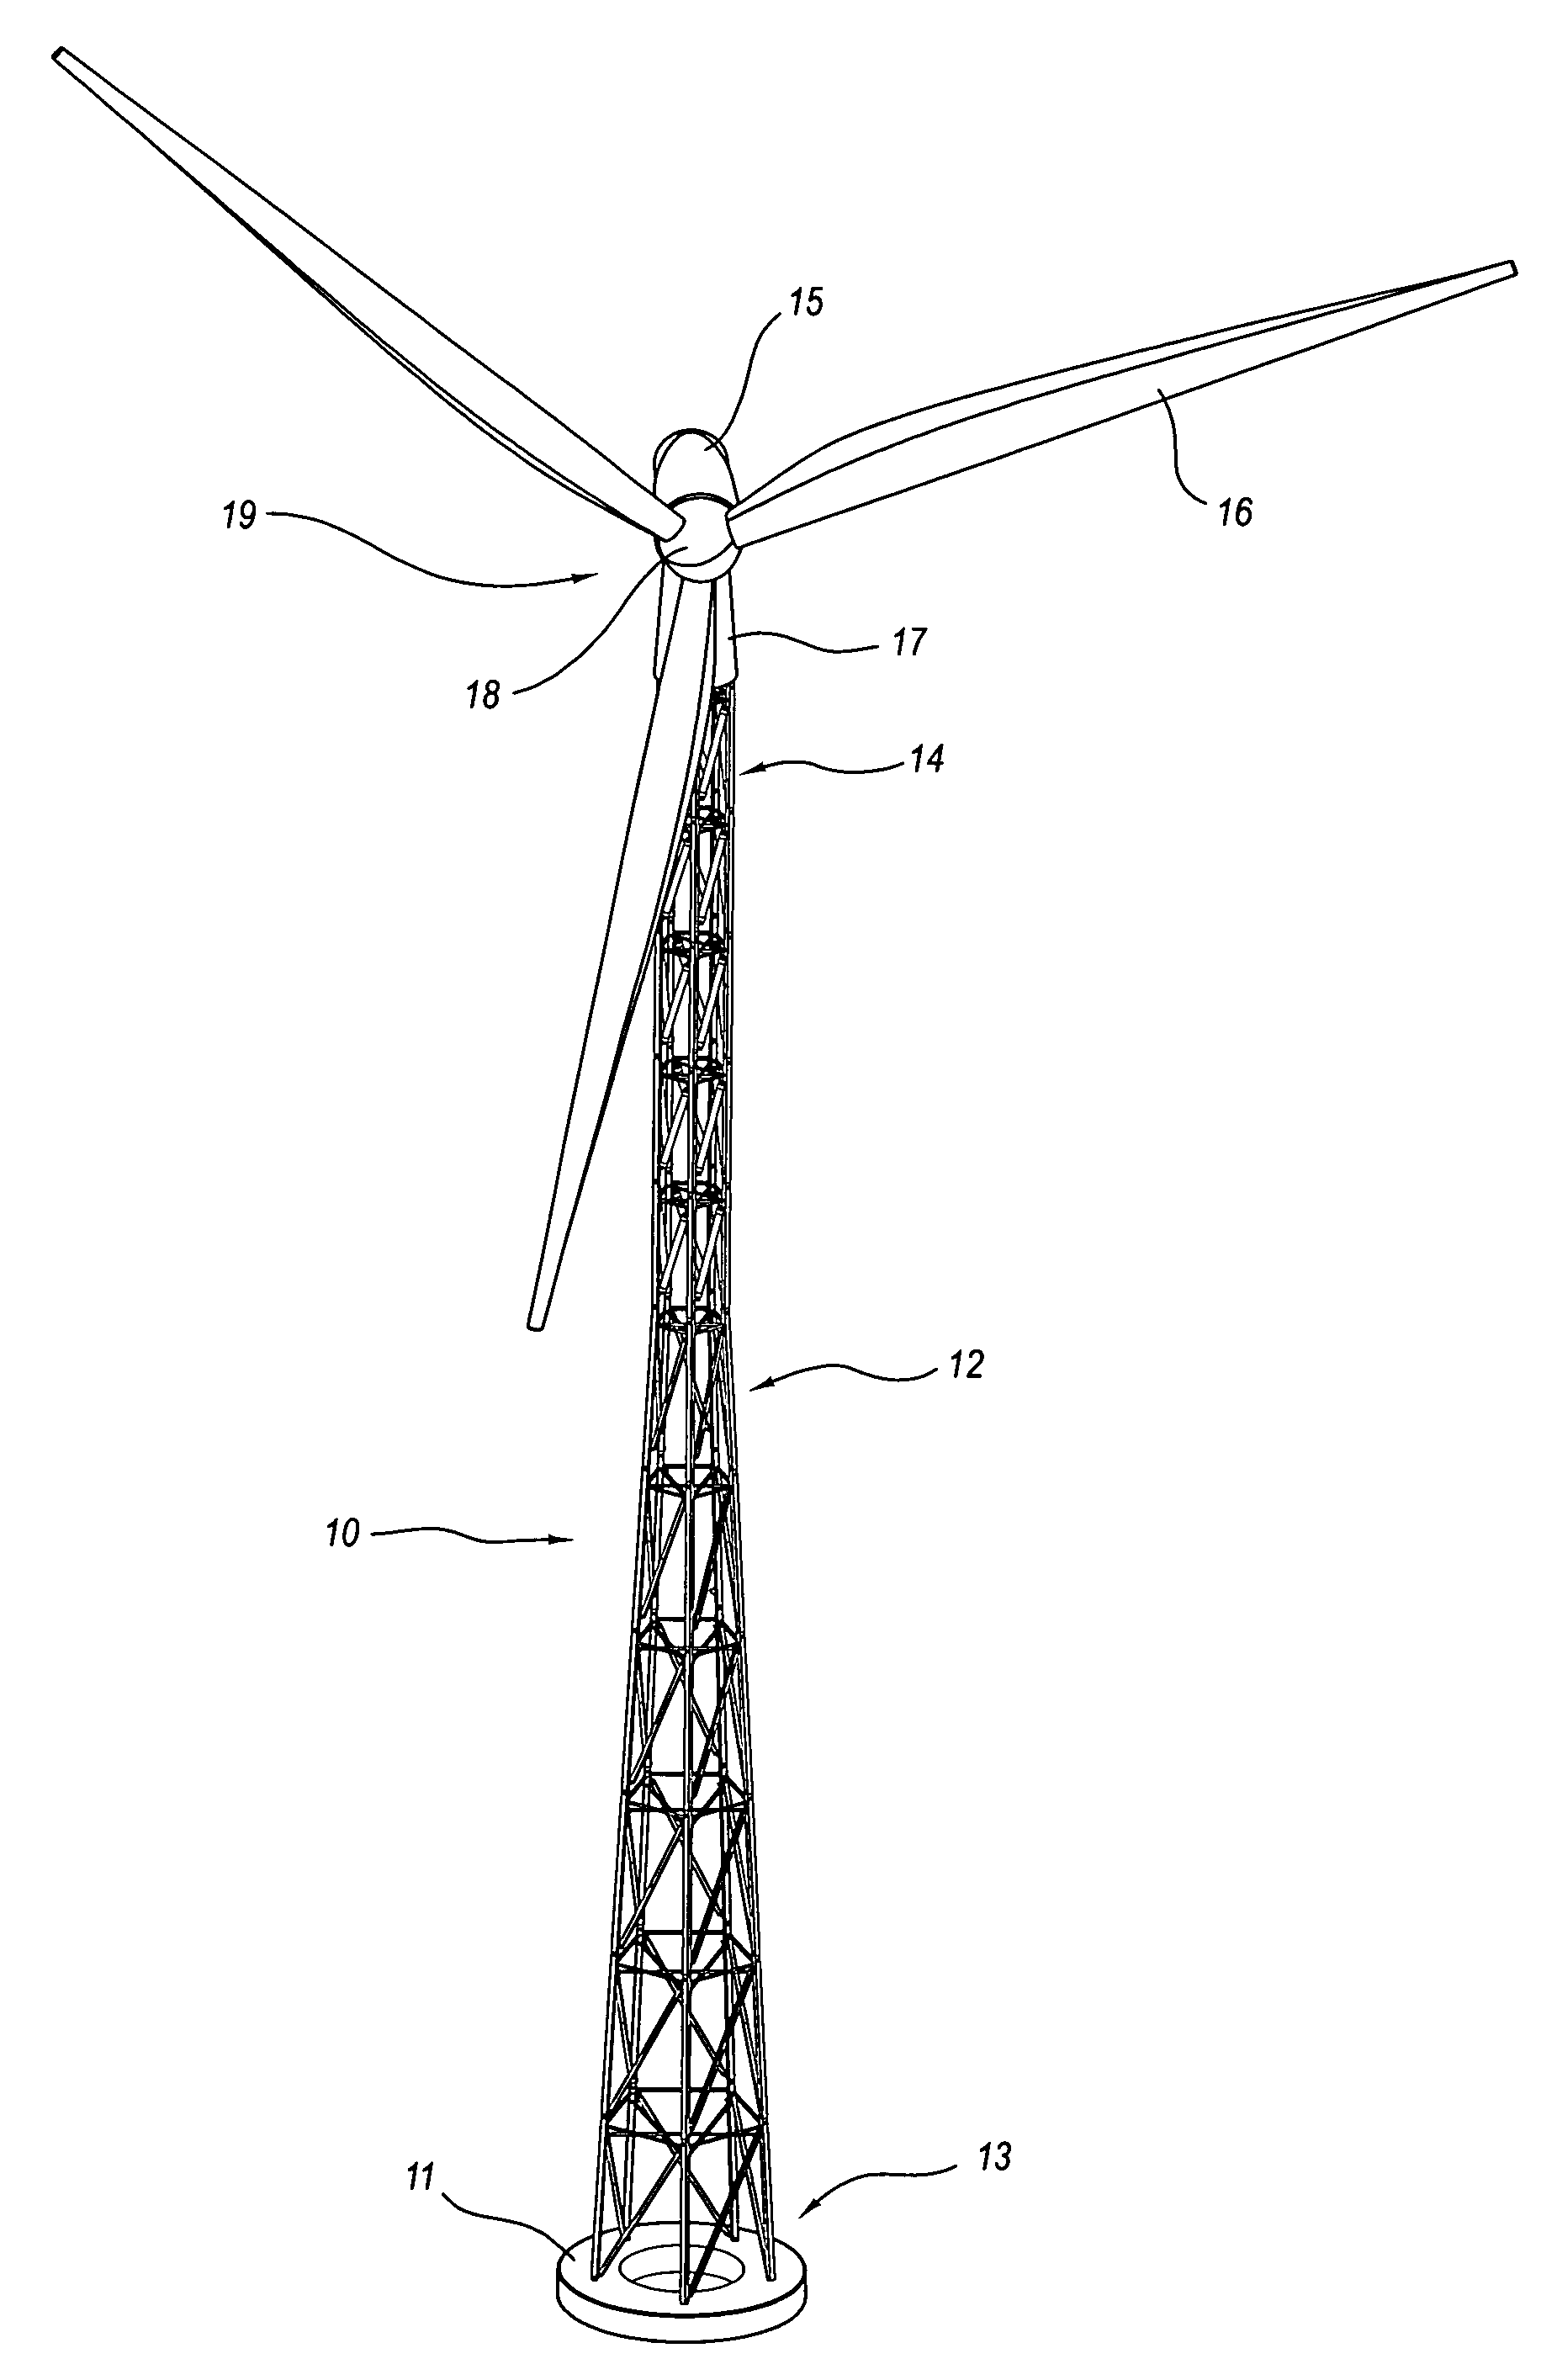 Lifting system and apparatus for constructing wind turbine towers